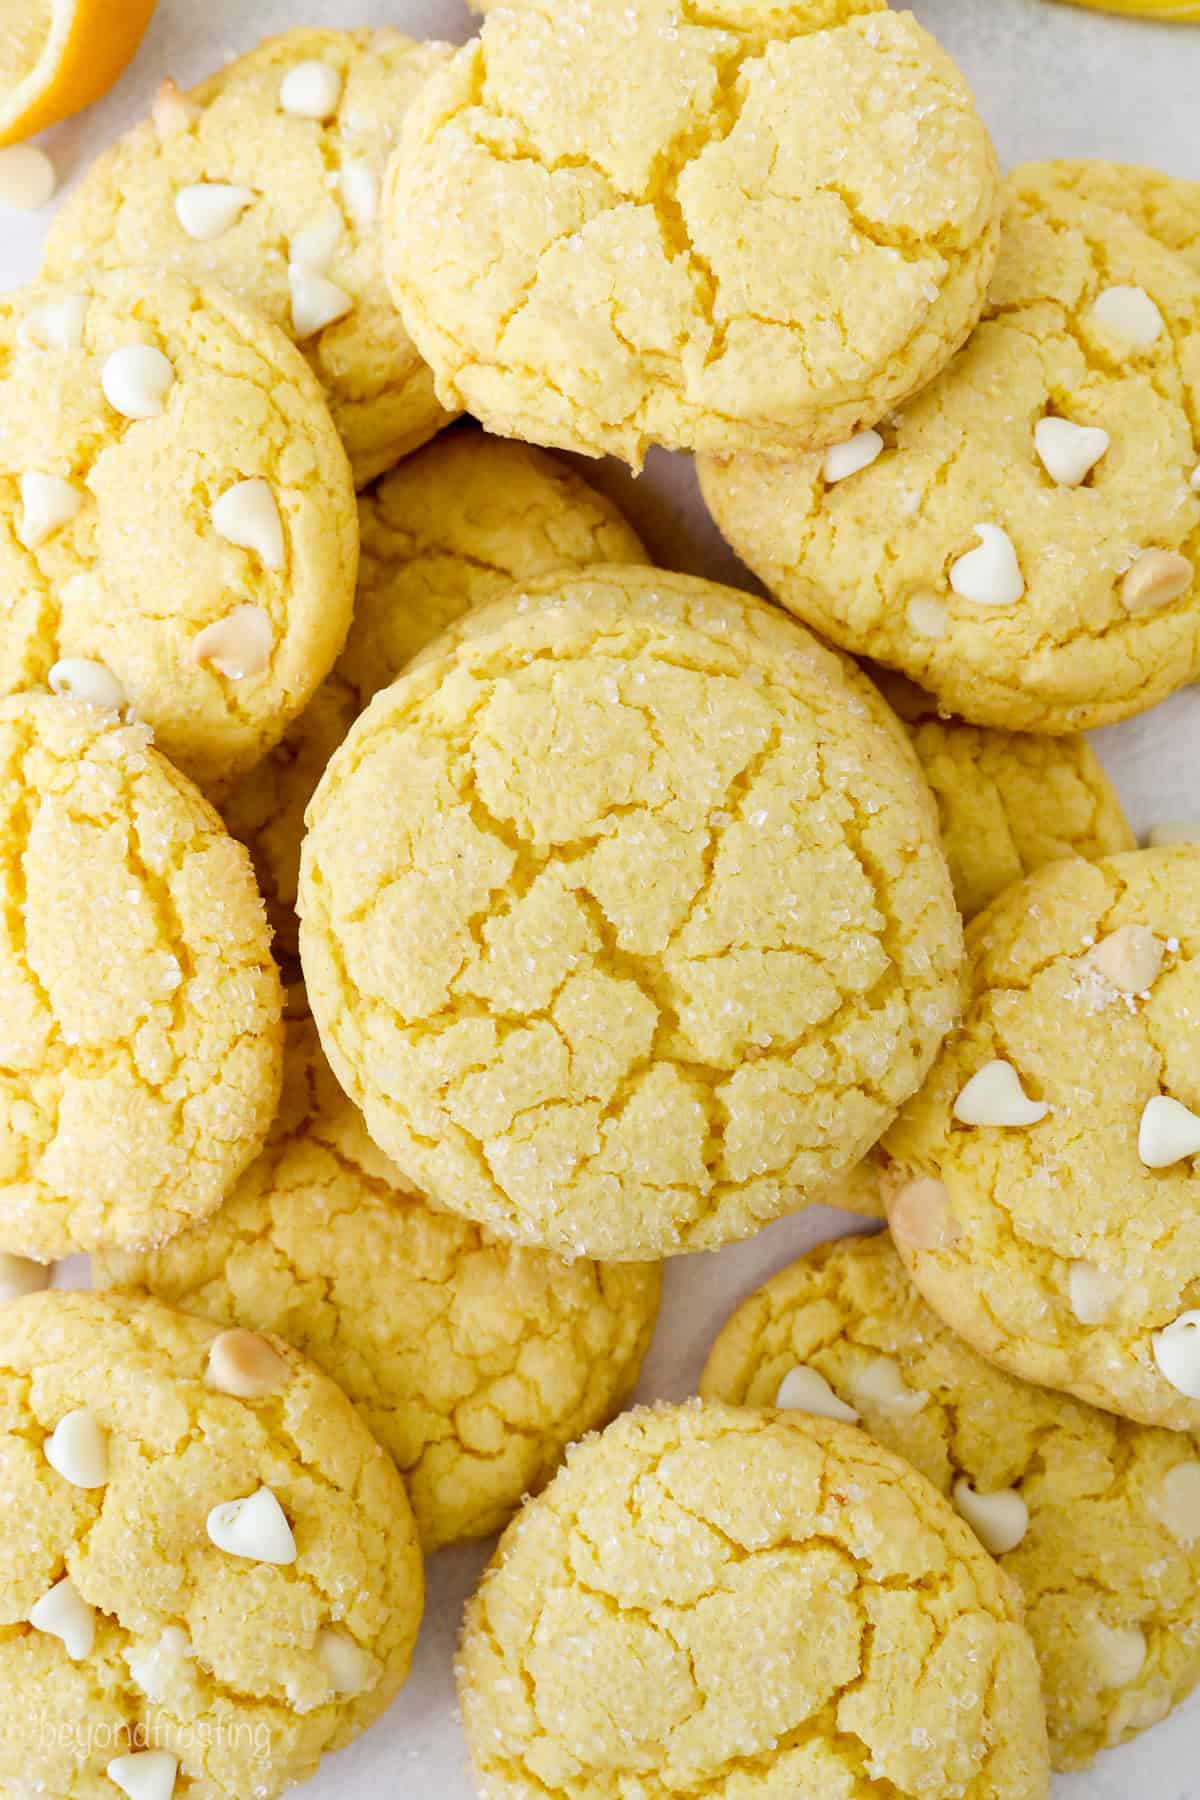 Overhead view of assorted lemon cake mix cookies, some filled with white chocolate chips.